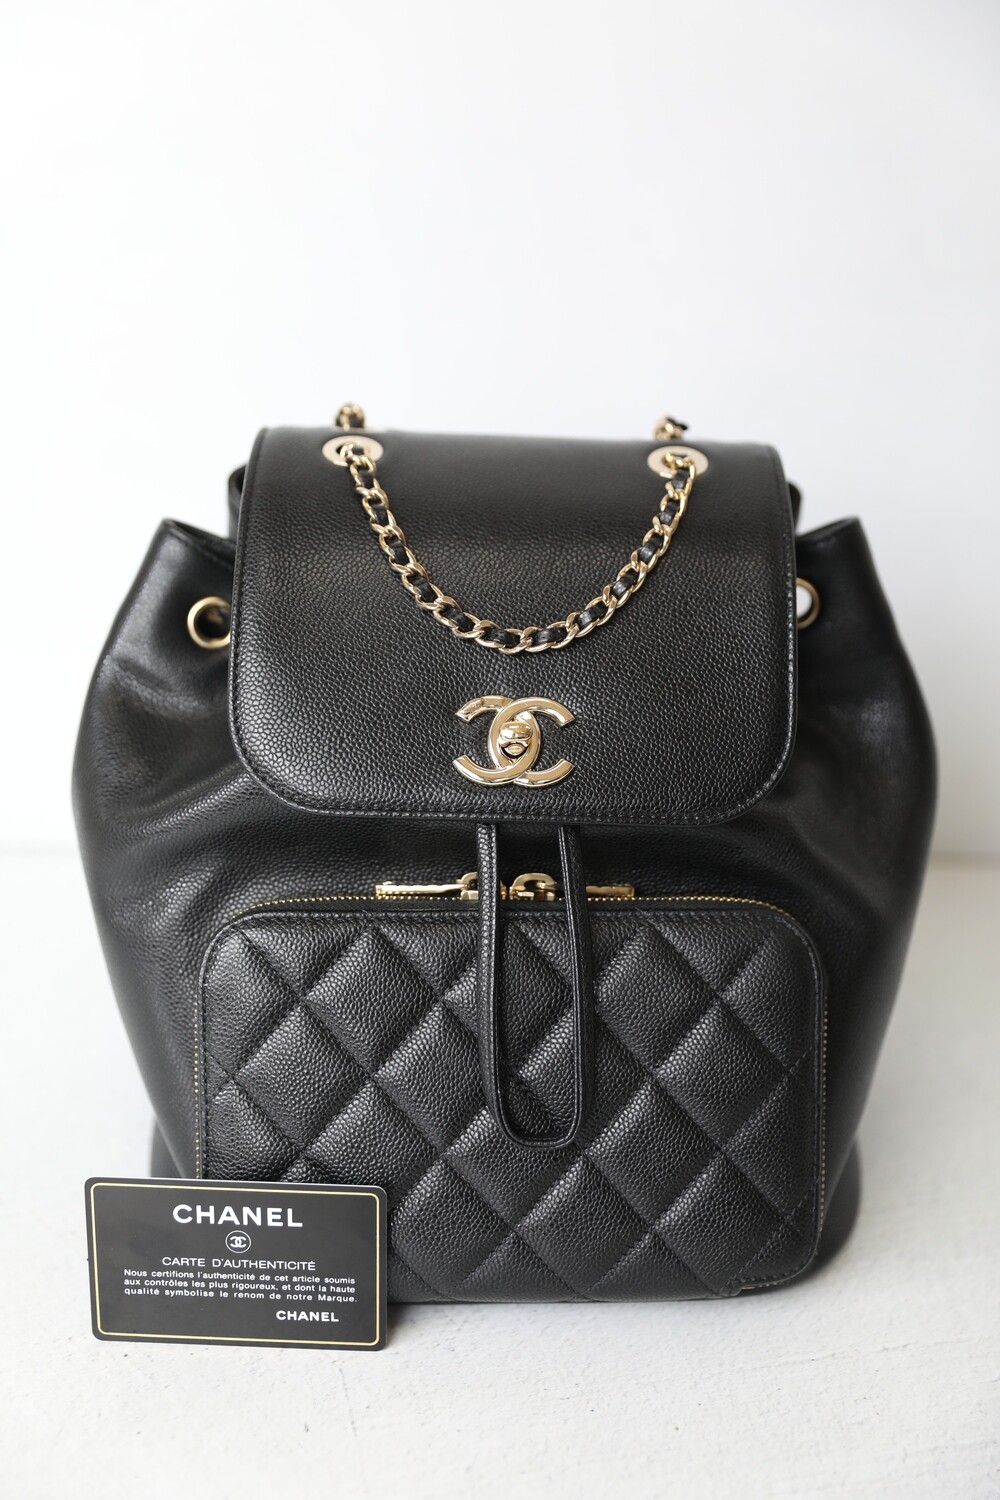 Chanel Business Affinity Medium, Black Caviar Leather With Gold Hardware,  New in Dustbag WA001